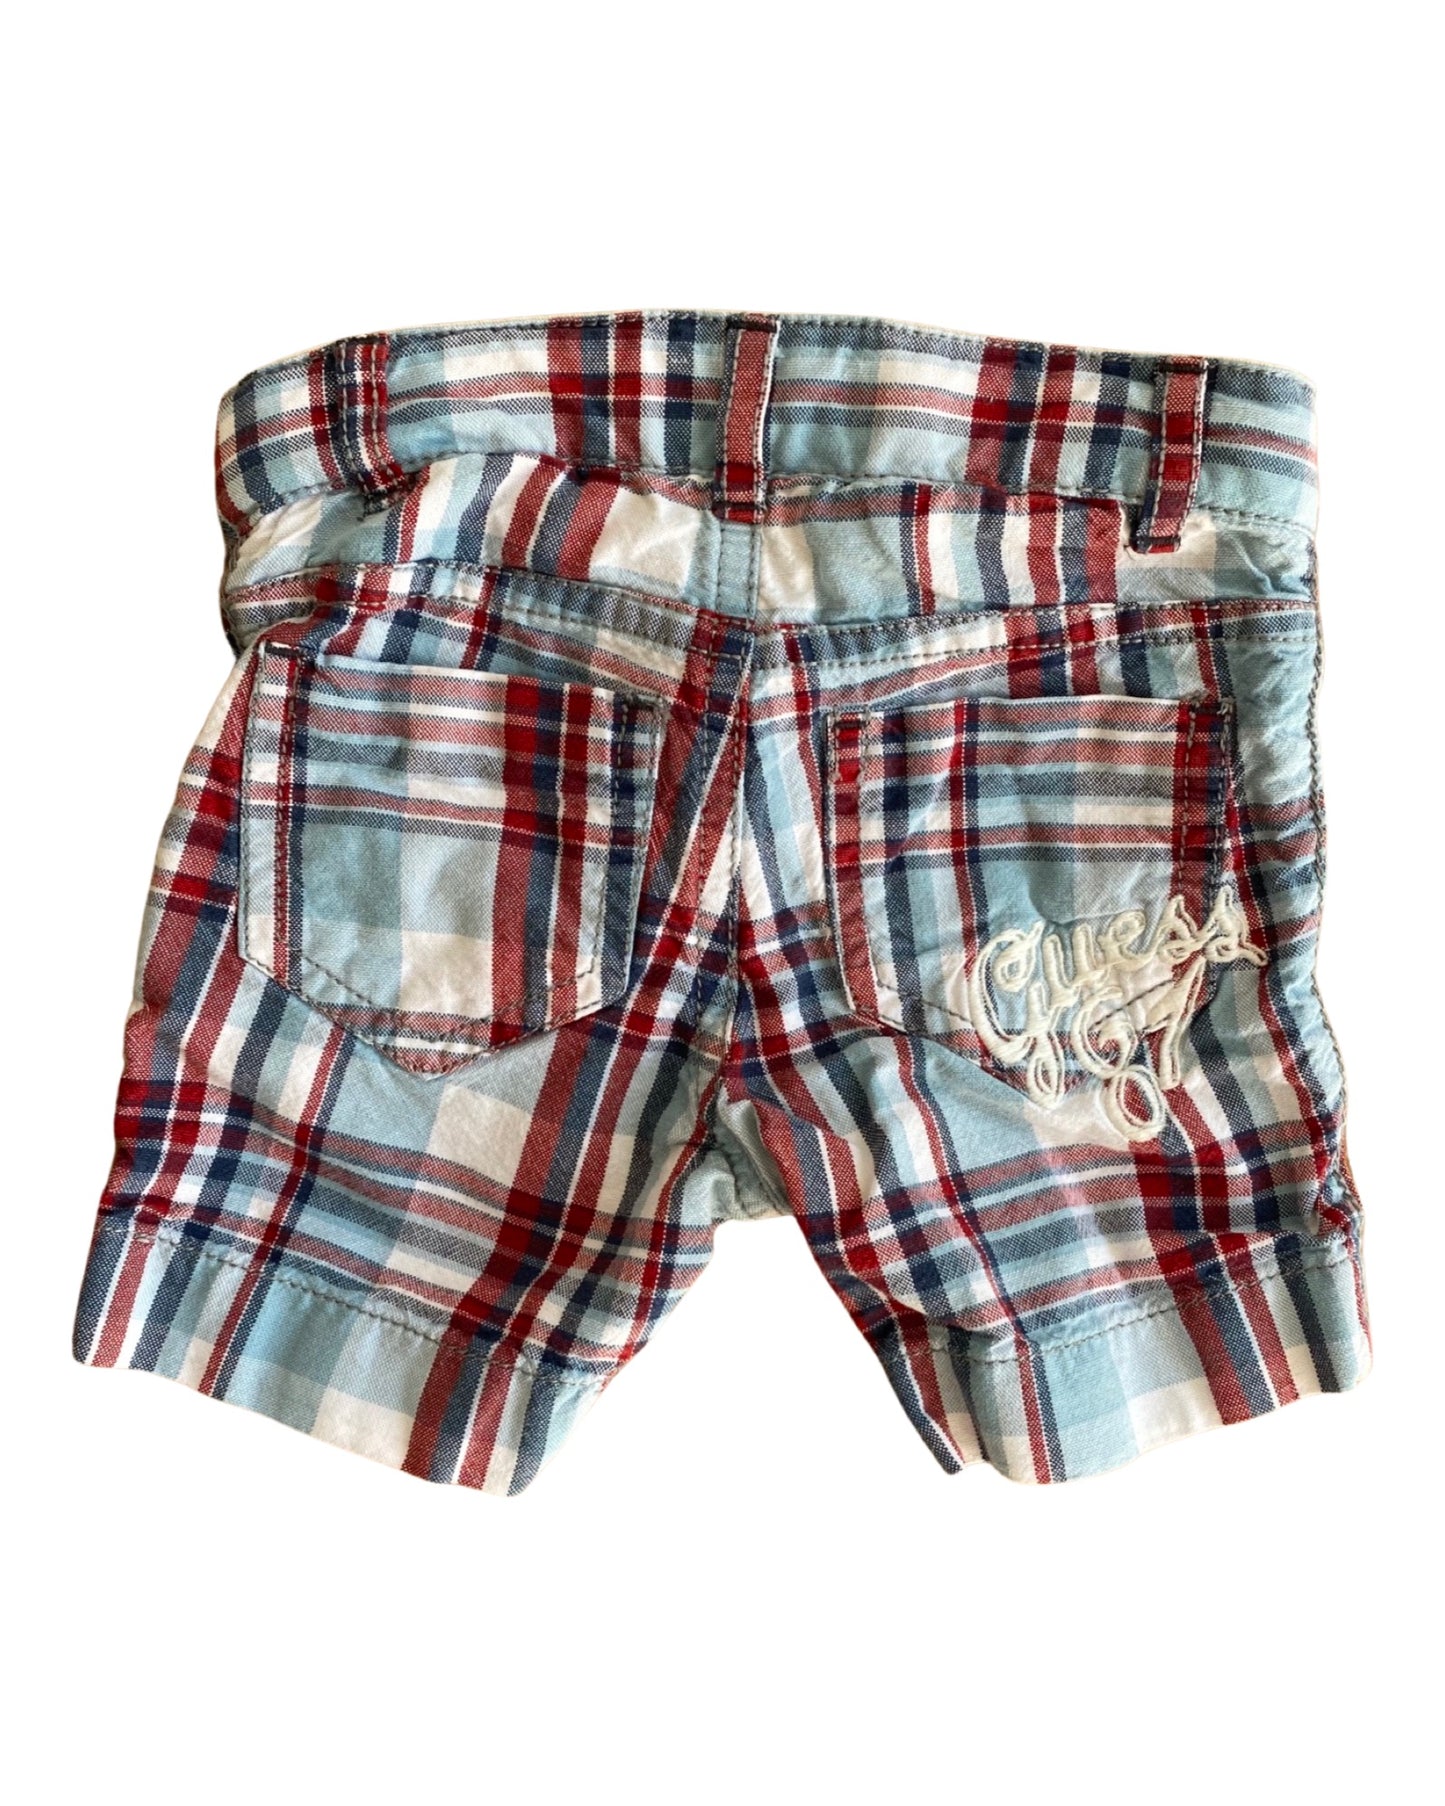 Guess vintage checked shorts (3-6mths)